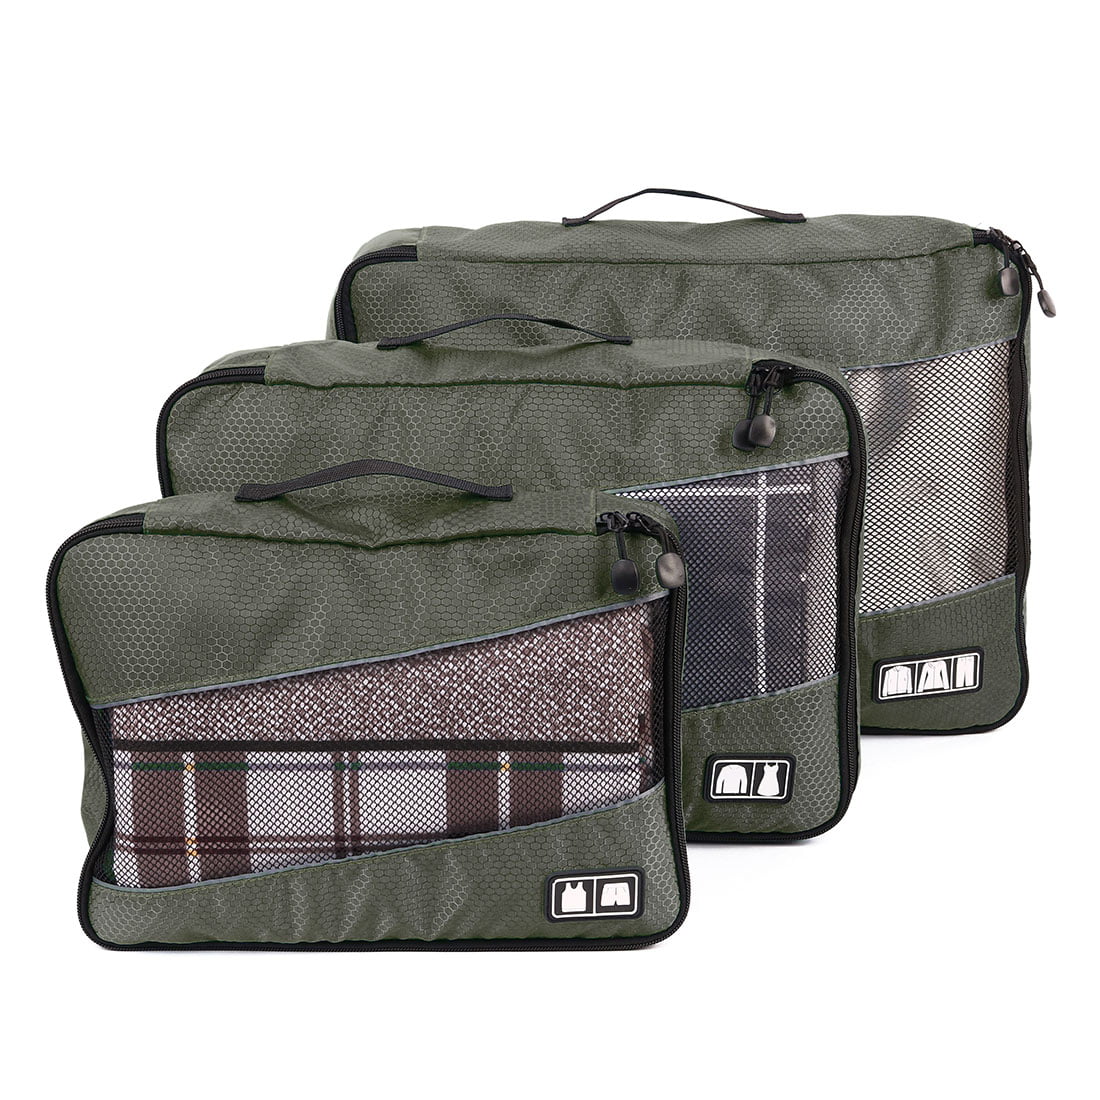 3 in 1 Travel Packing Cube Clothes Storage Suitcase Bags Luggage Organizer Pouch Dark Gray ...